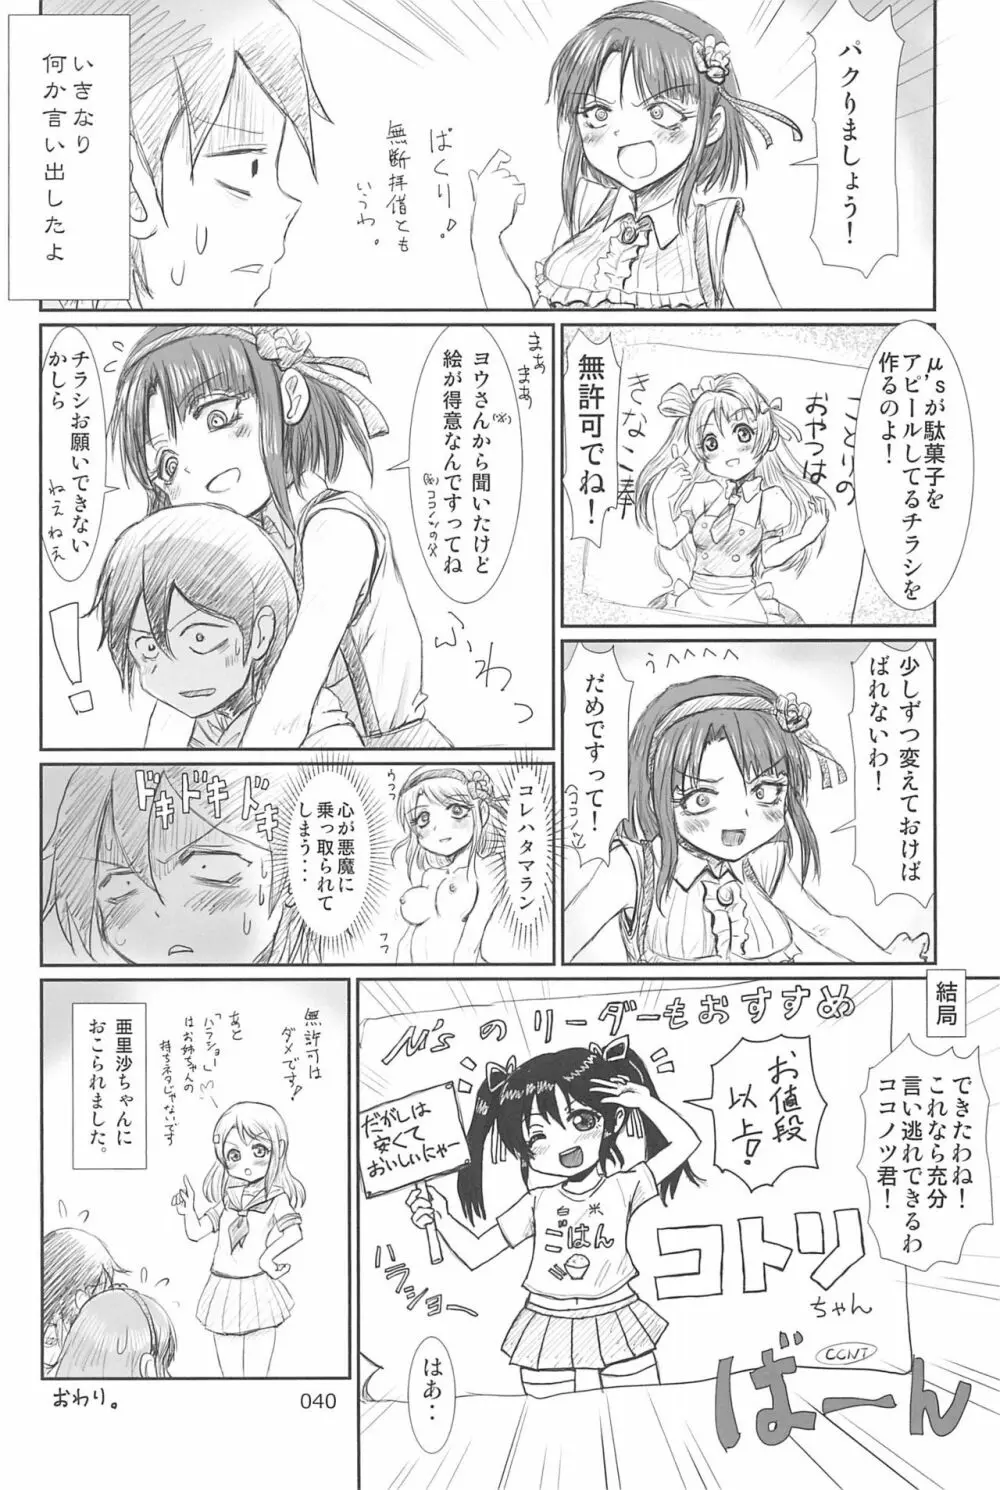 ND-special Volume 6 40ページ